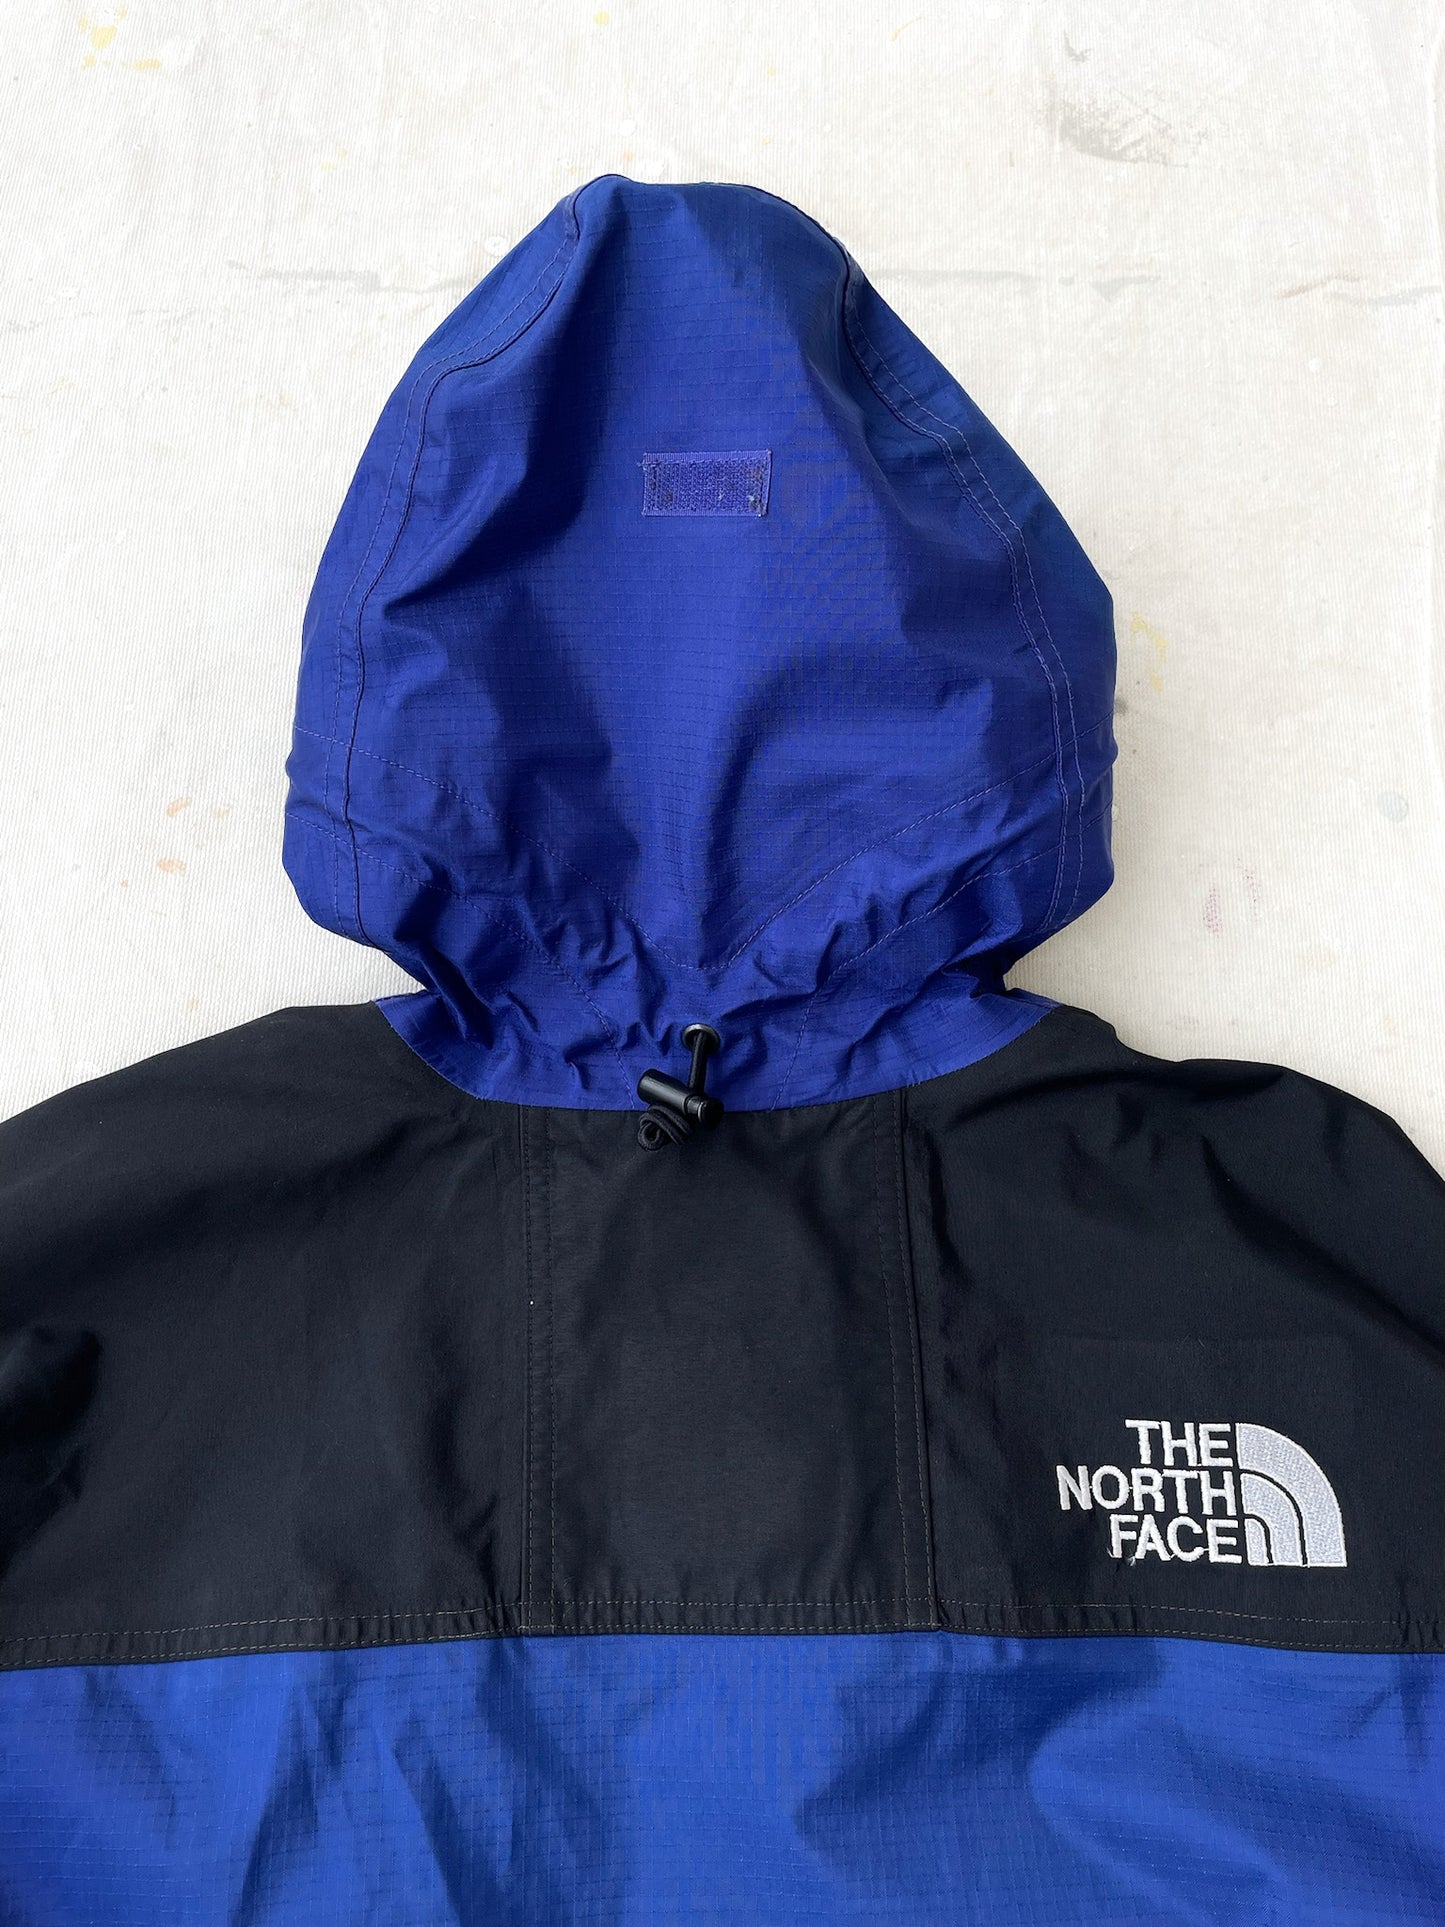 90’s The North Face Gore-Tex Mountain Jacket—[M]